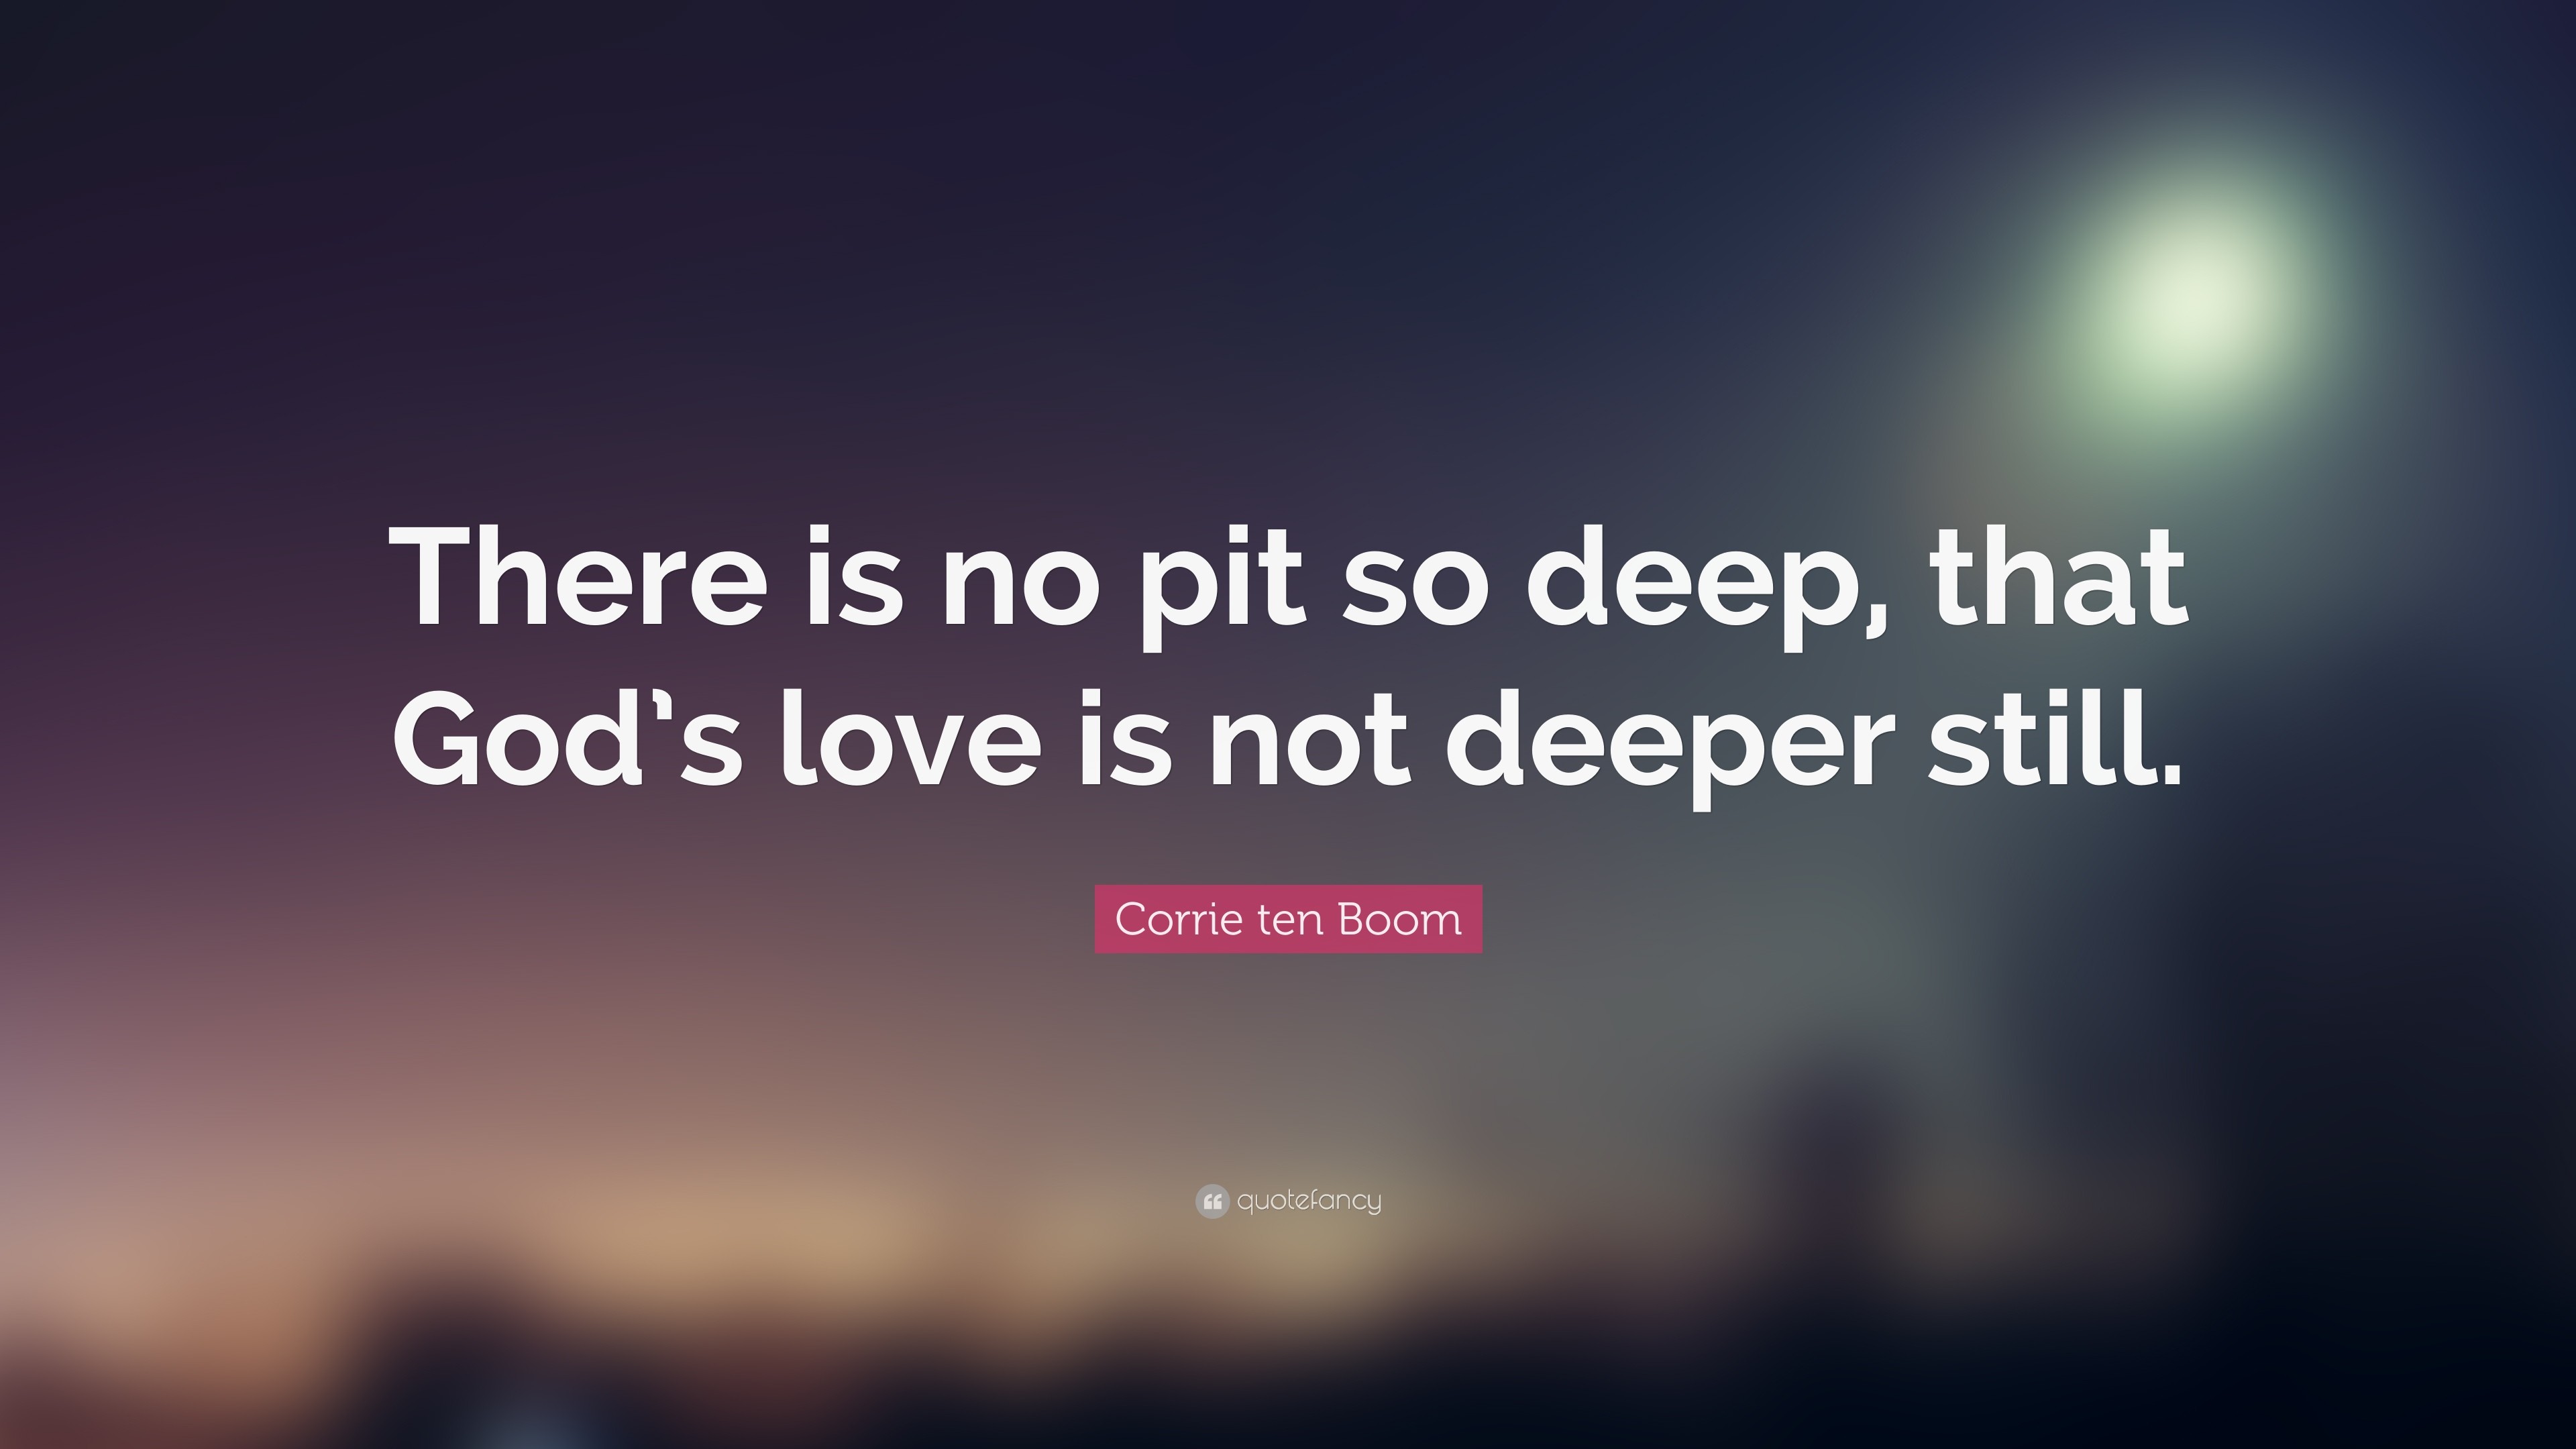 3840x2160 Corrie ten Boom Quote: “There is no pit so deep, that God's love